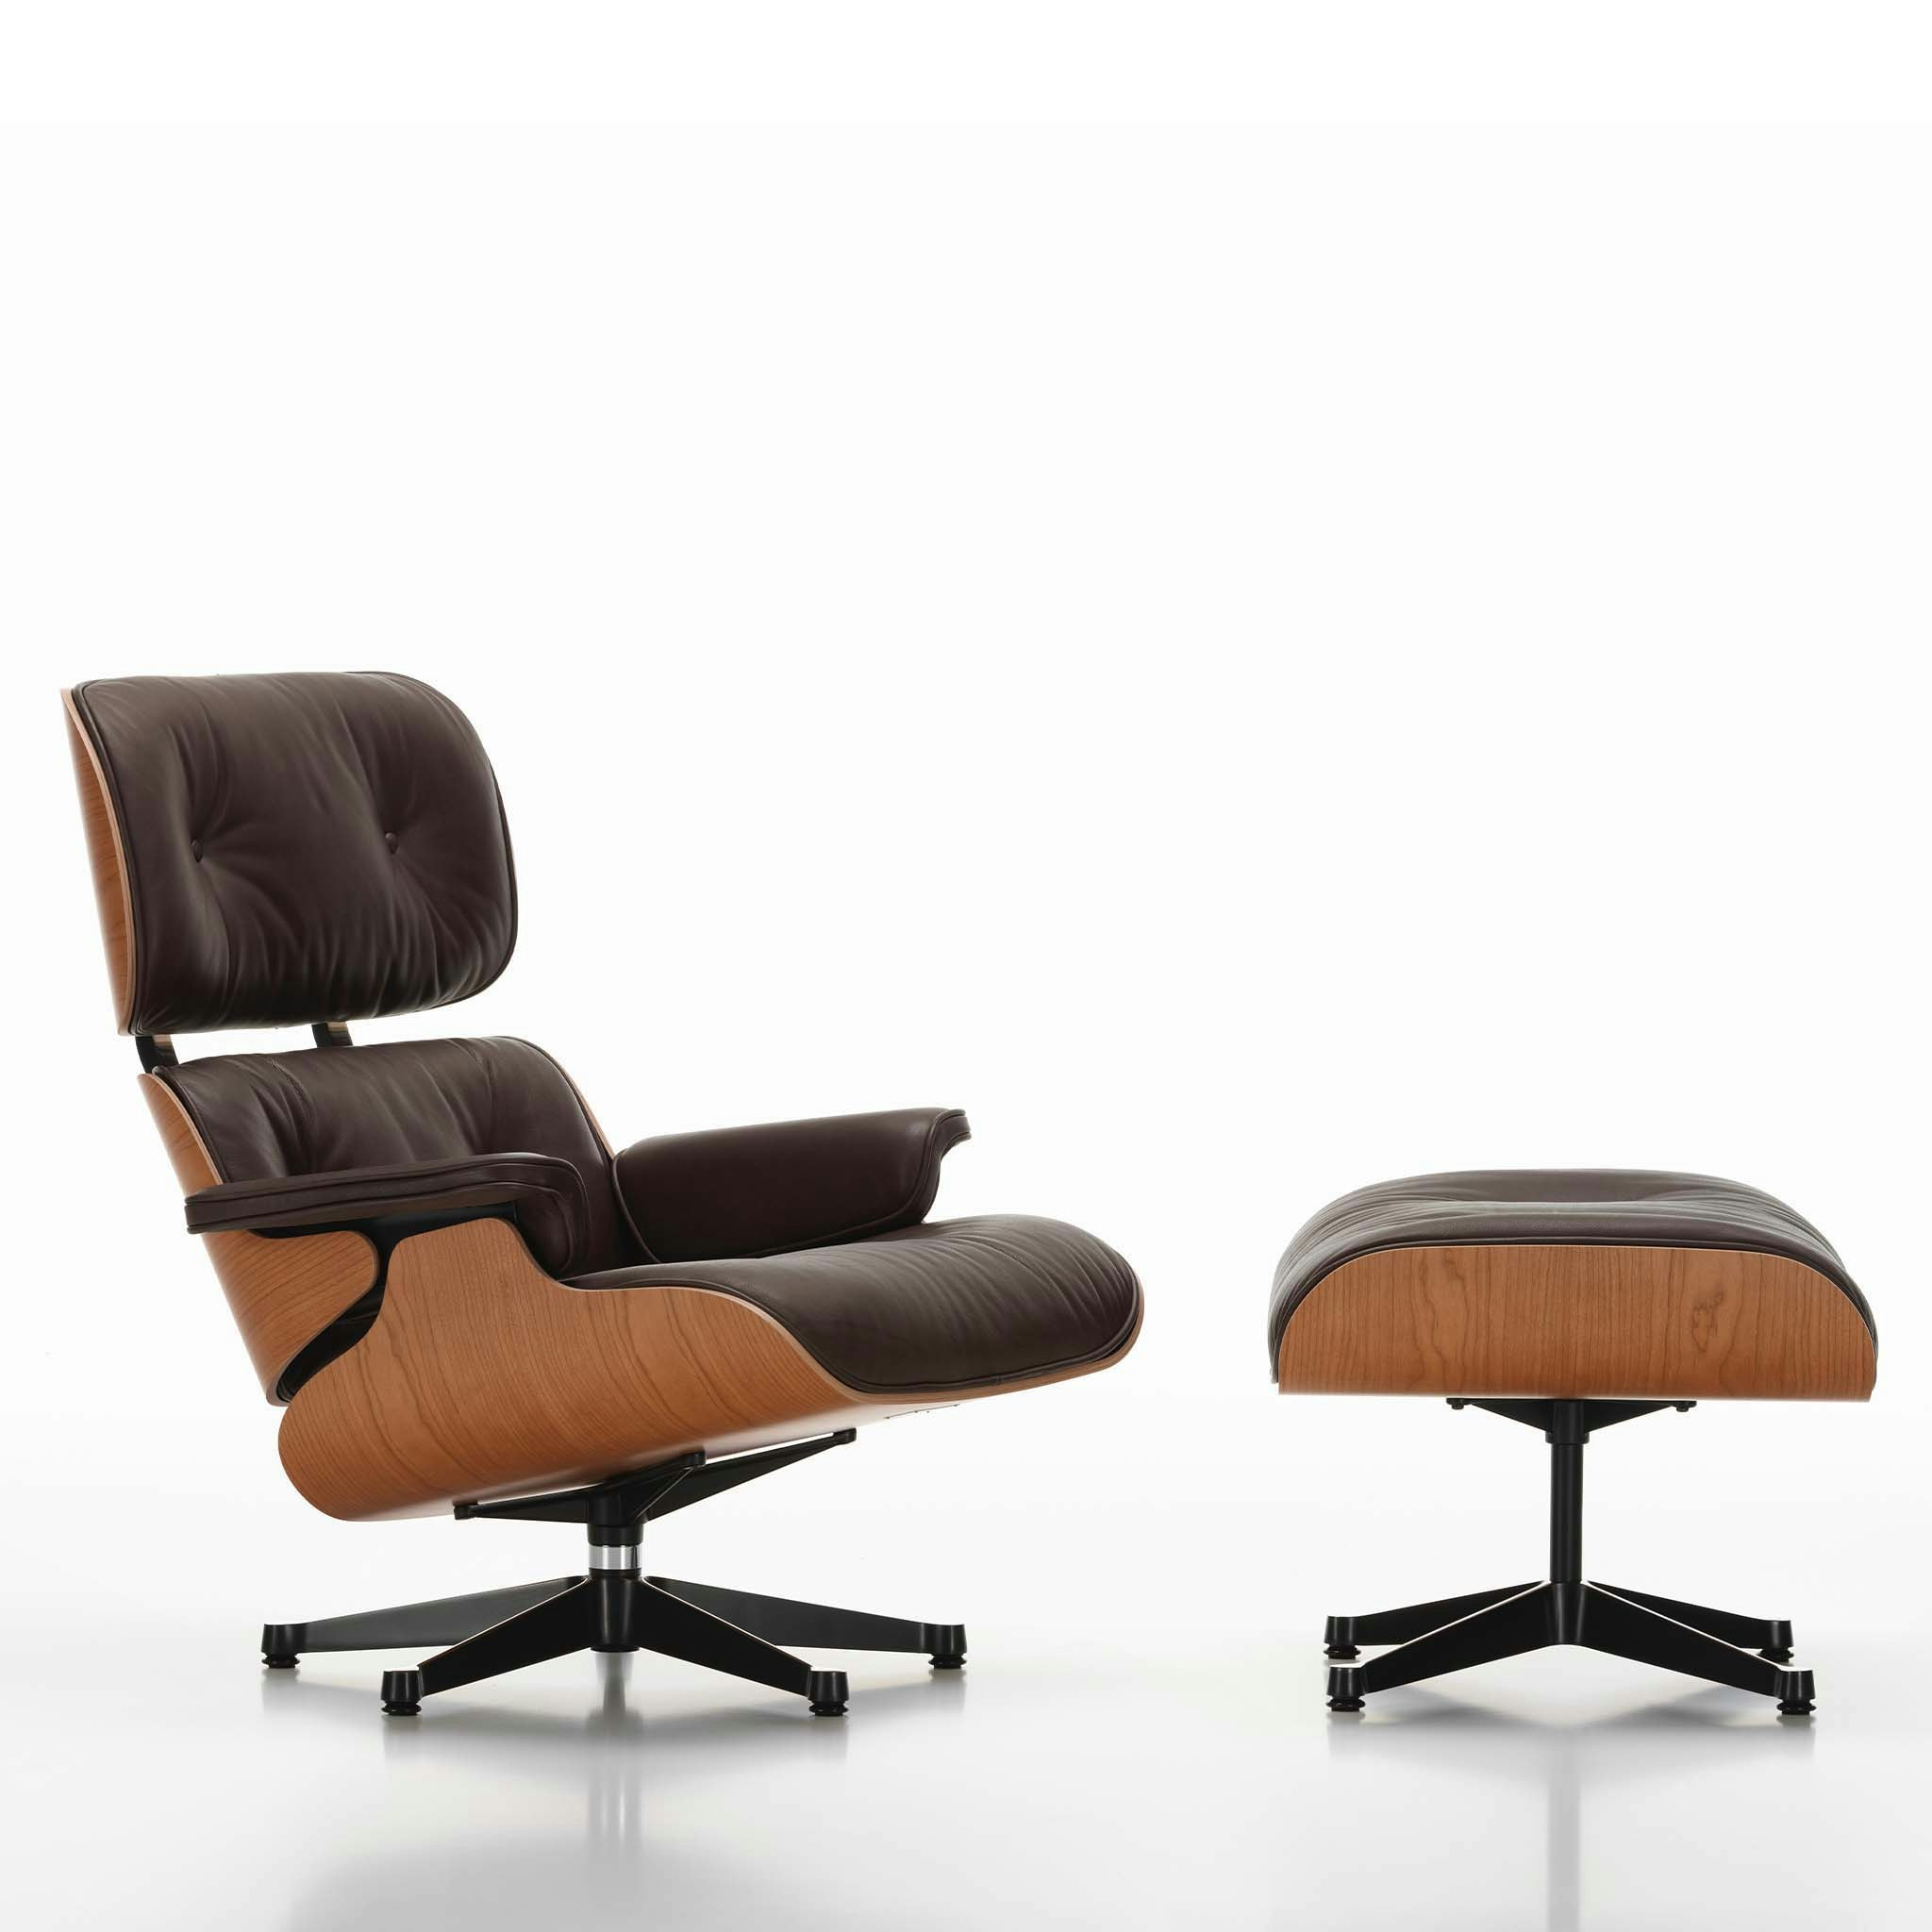 Eames Lounge Chair, New Dimensions by Vitra